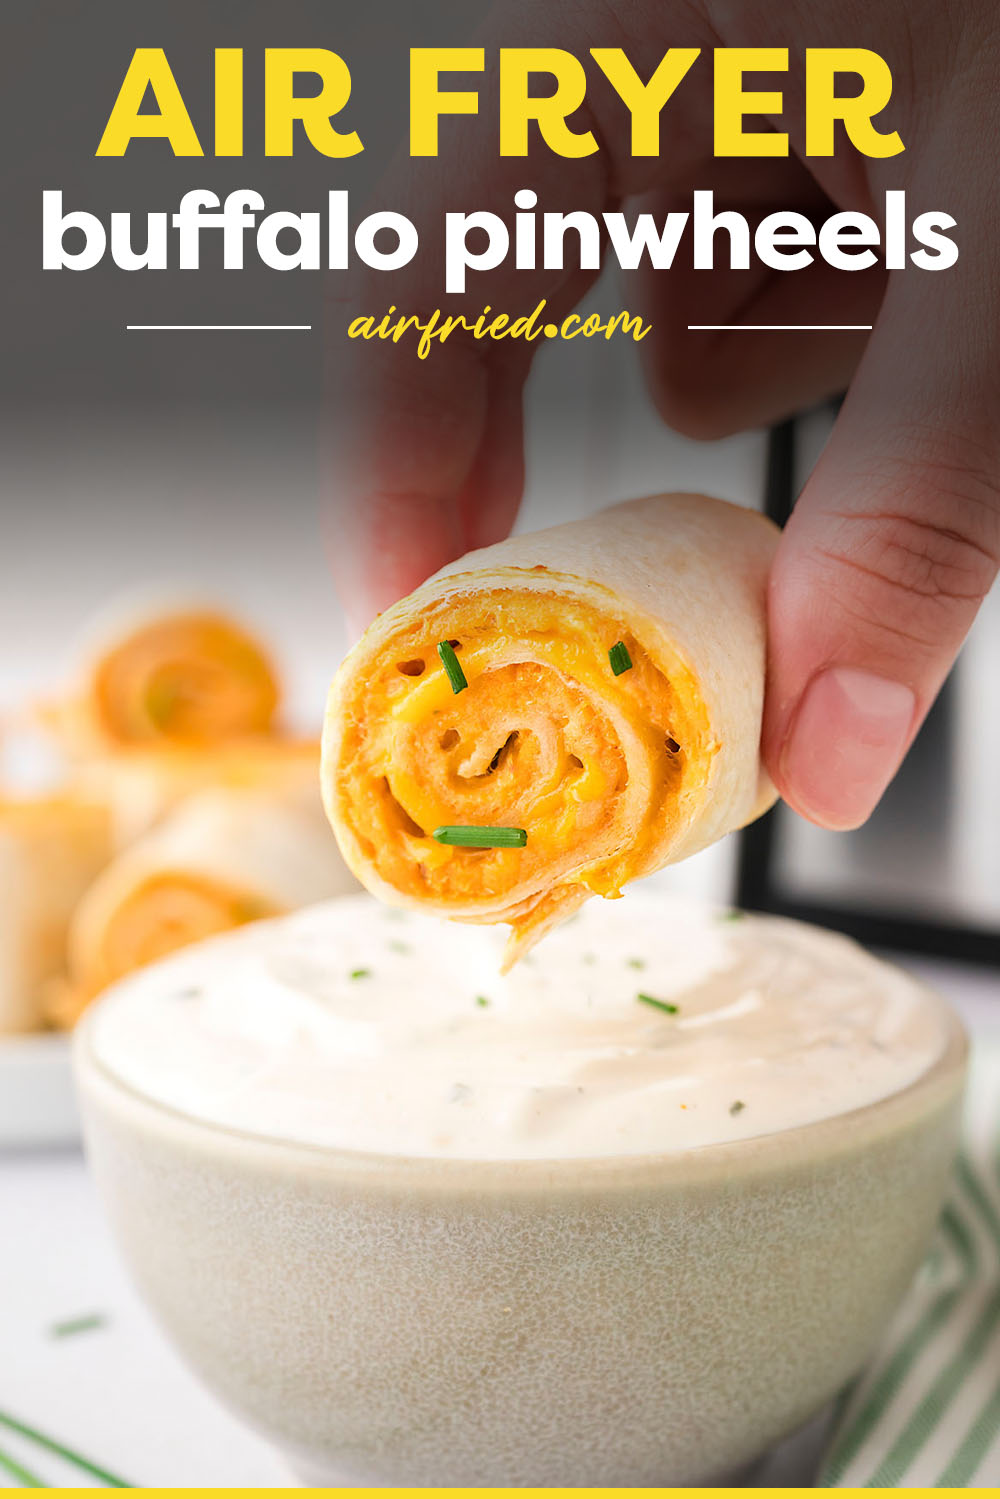 Our Buffalo chicken pinwheel recipe is full of wonderful flavor and is very easy to prepare!